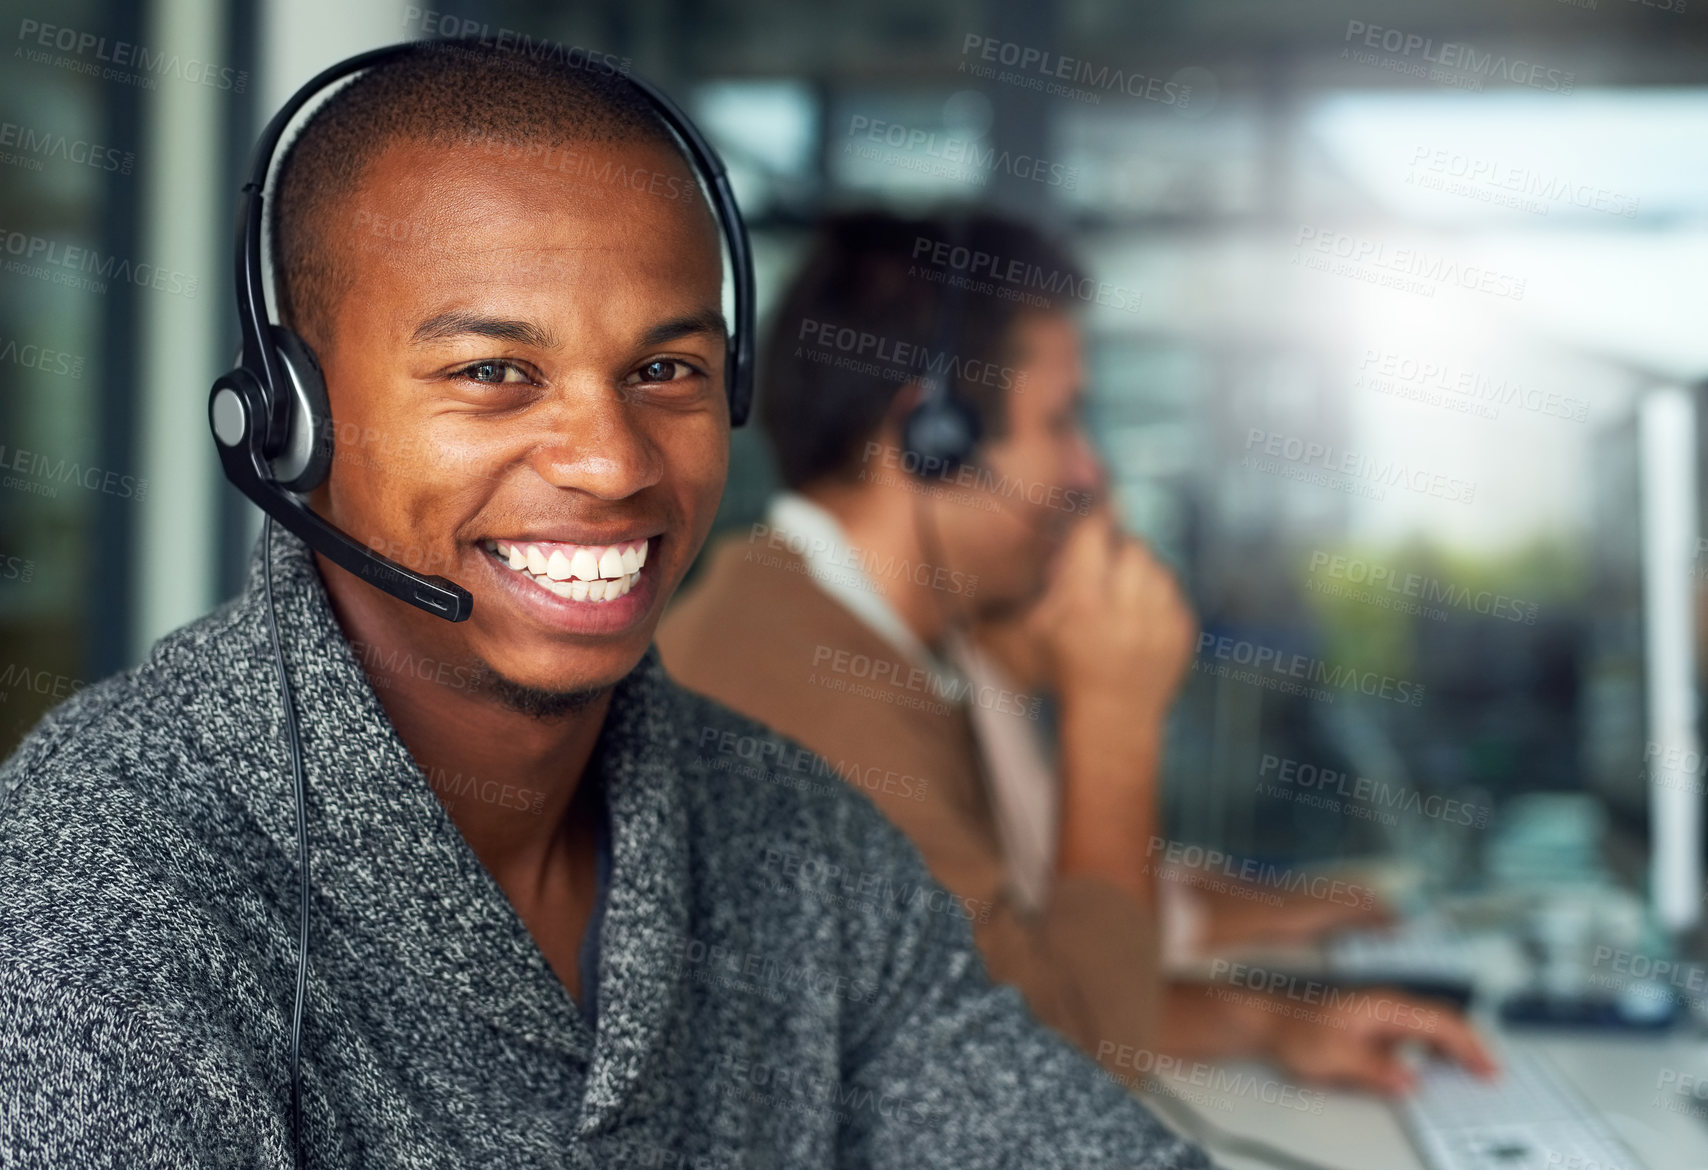 Buy stock photo Portrait of a call centre agent working in an office with his colleagues in the background